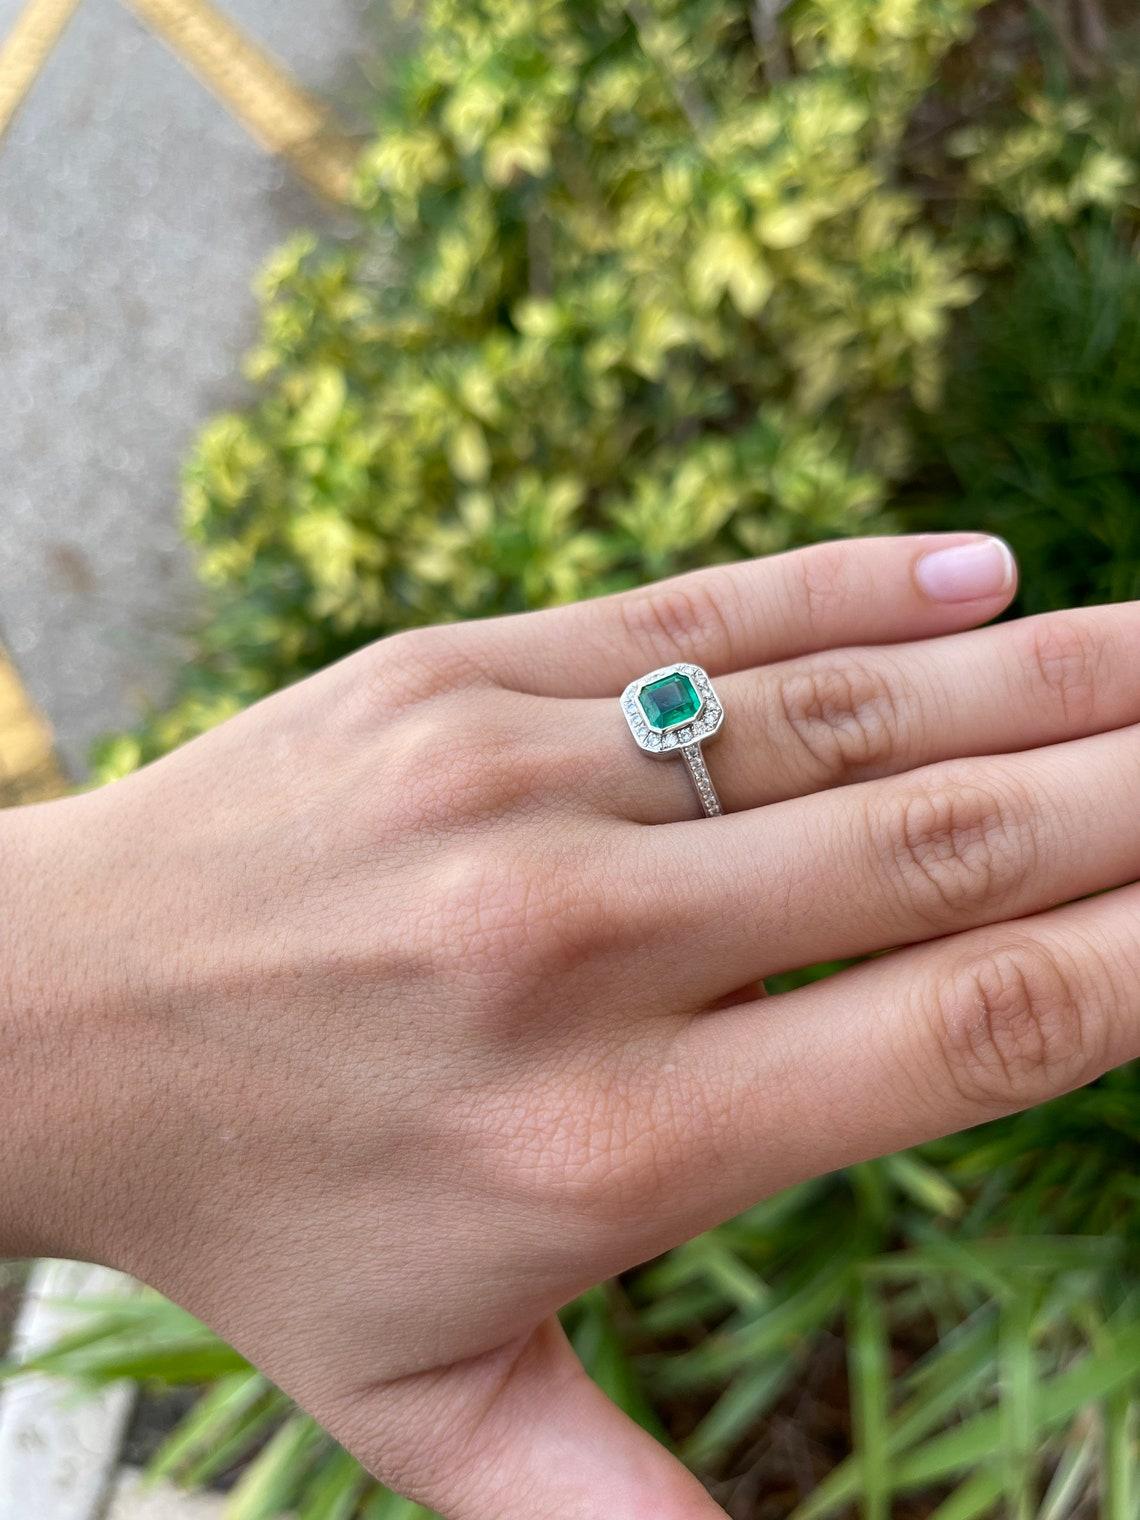 antique colombian emerald ring